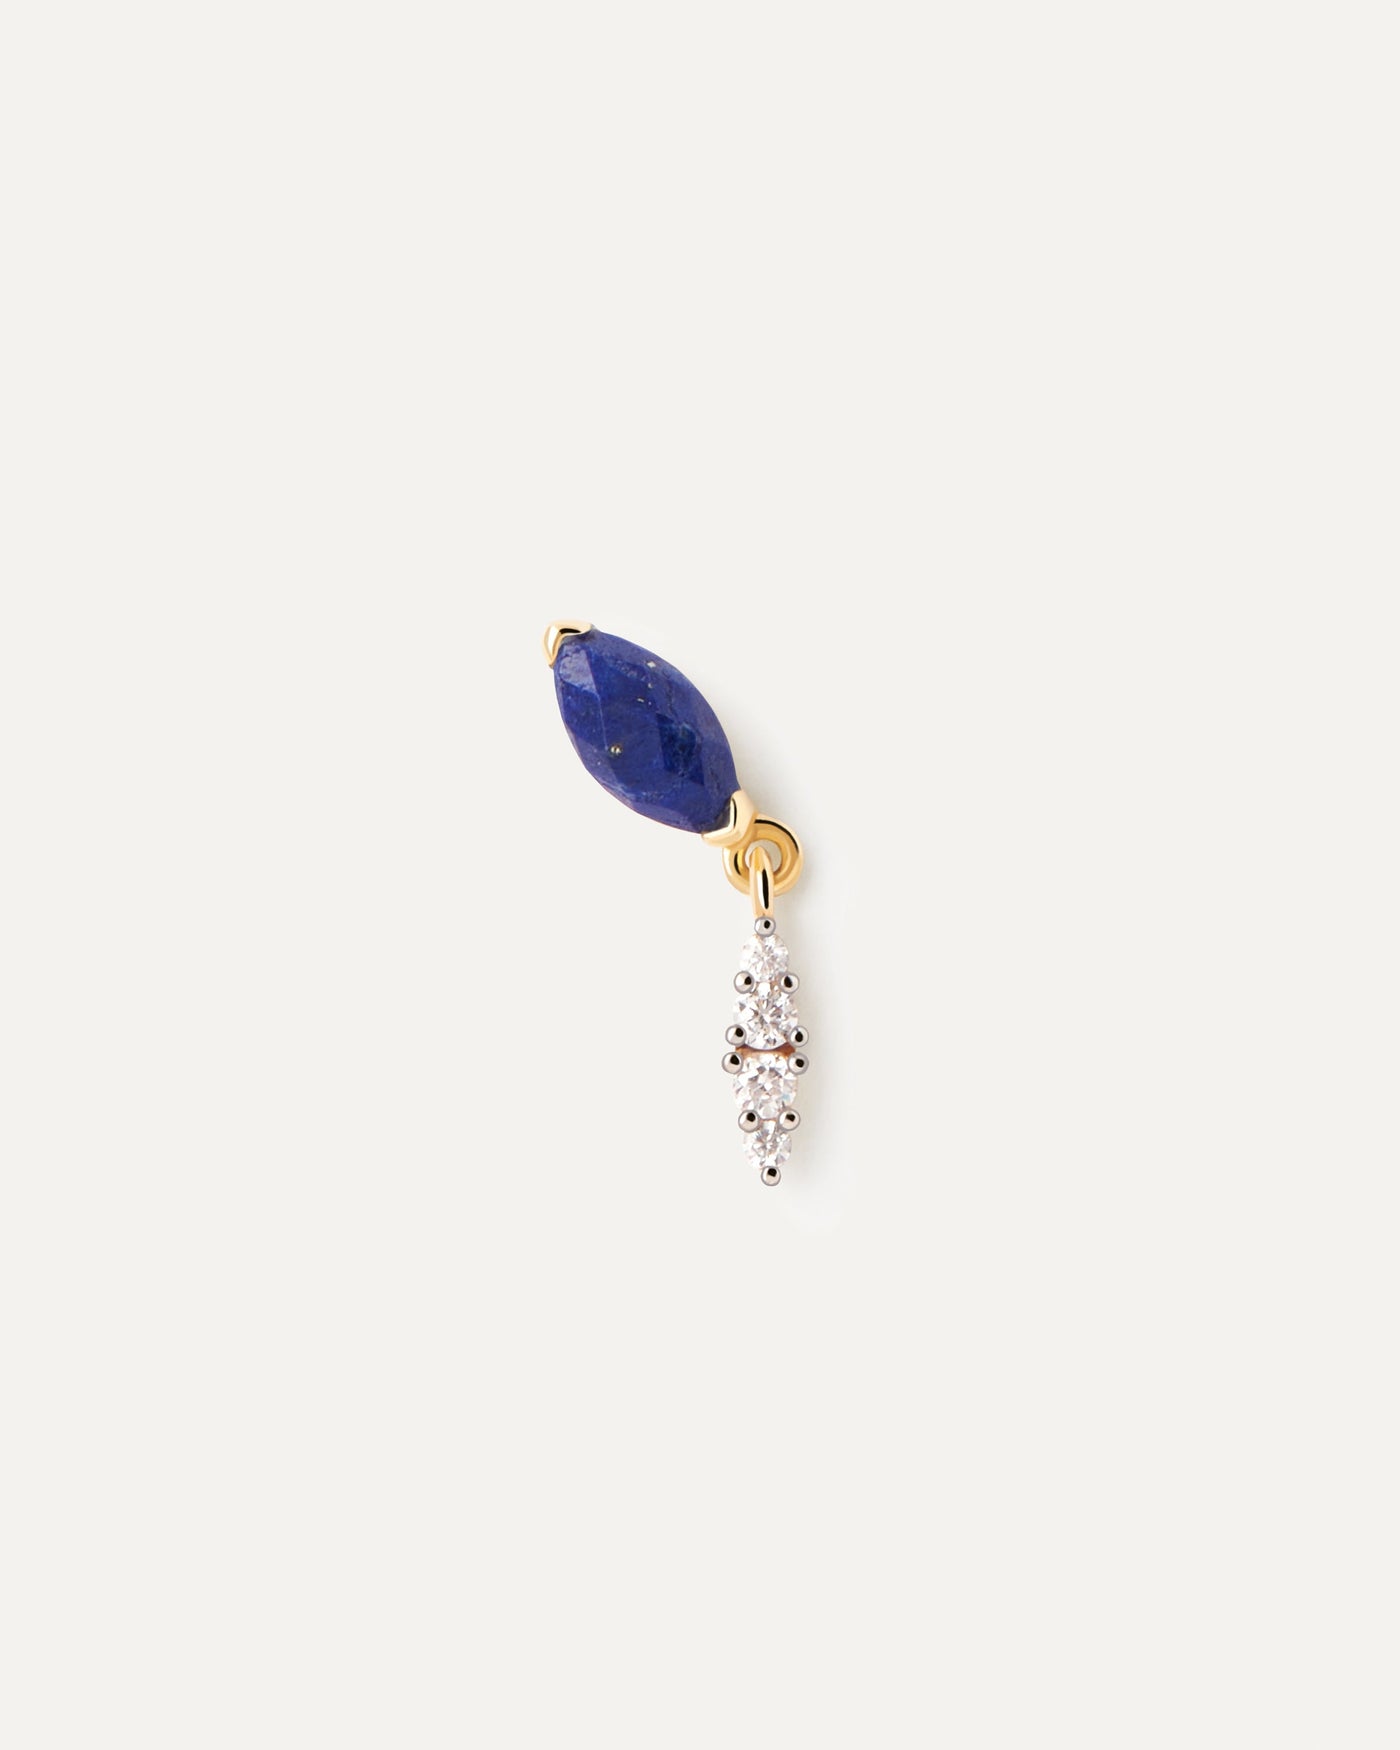 2023 Selection | Lapis Lazuli Ginger Single Earring. Gold-plated stud earring embellished with marquise cut blue gemstone. Get the latest arrival from PDPAOLA. Place your order safely and get this Best Seller. Free Shipping.